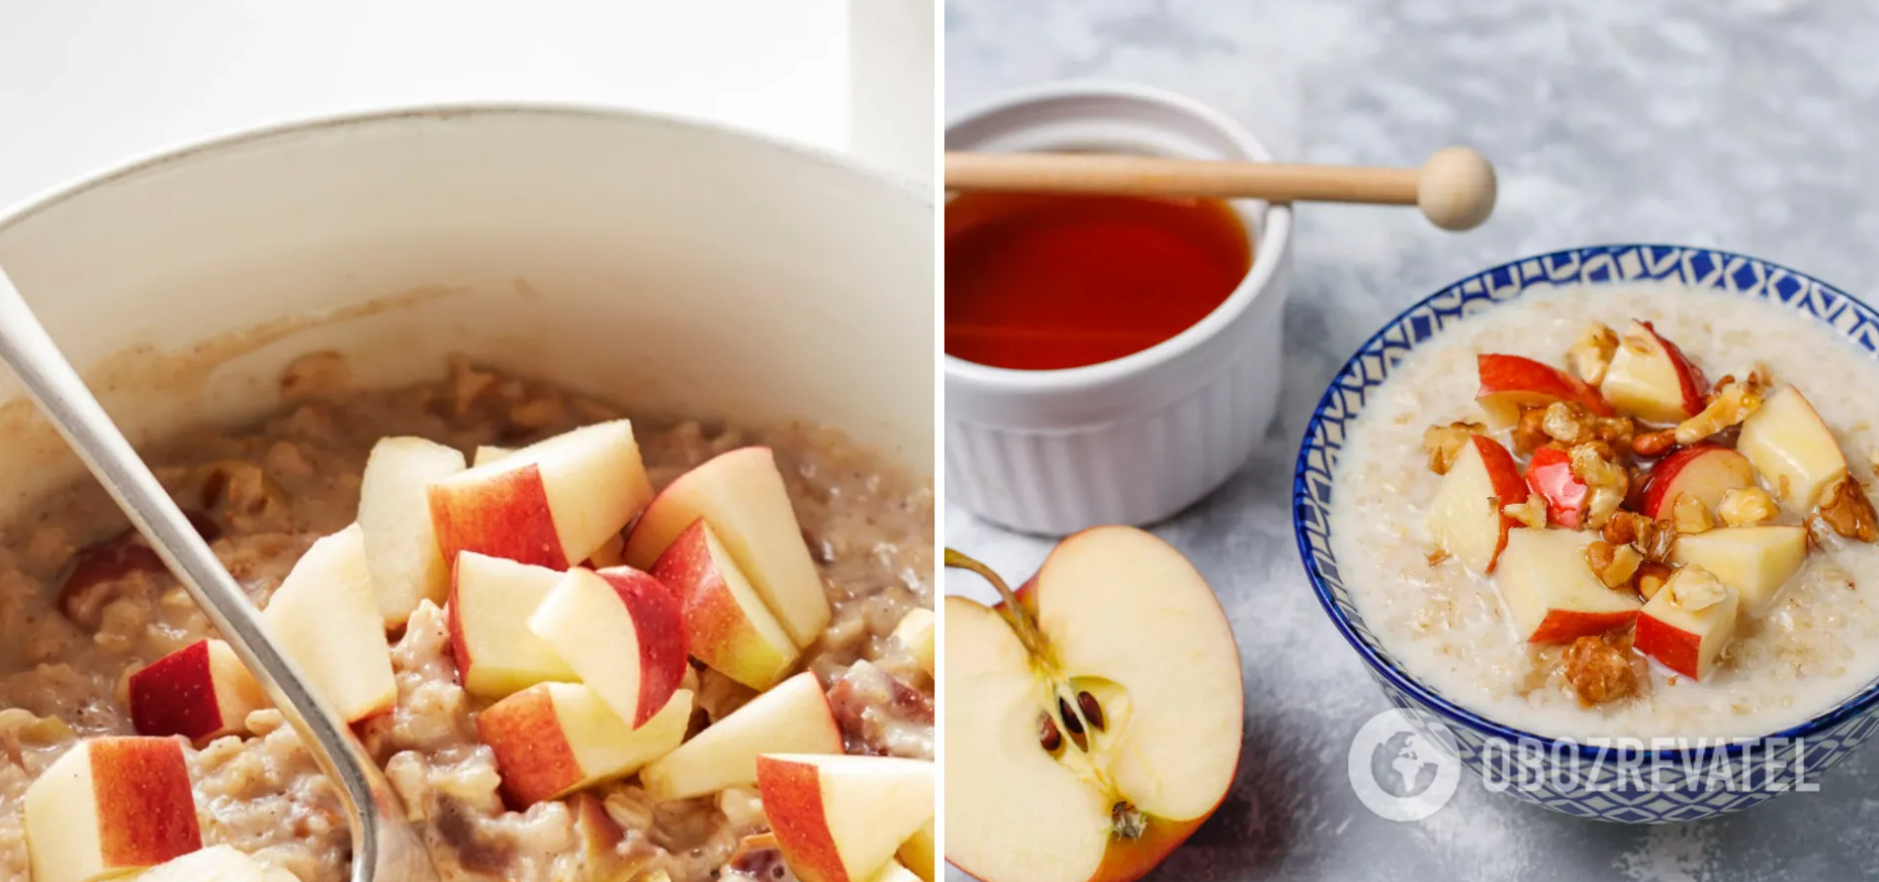 Oatmeal with apple